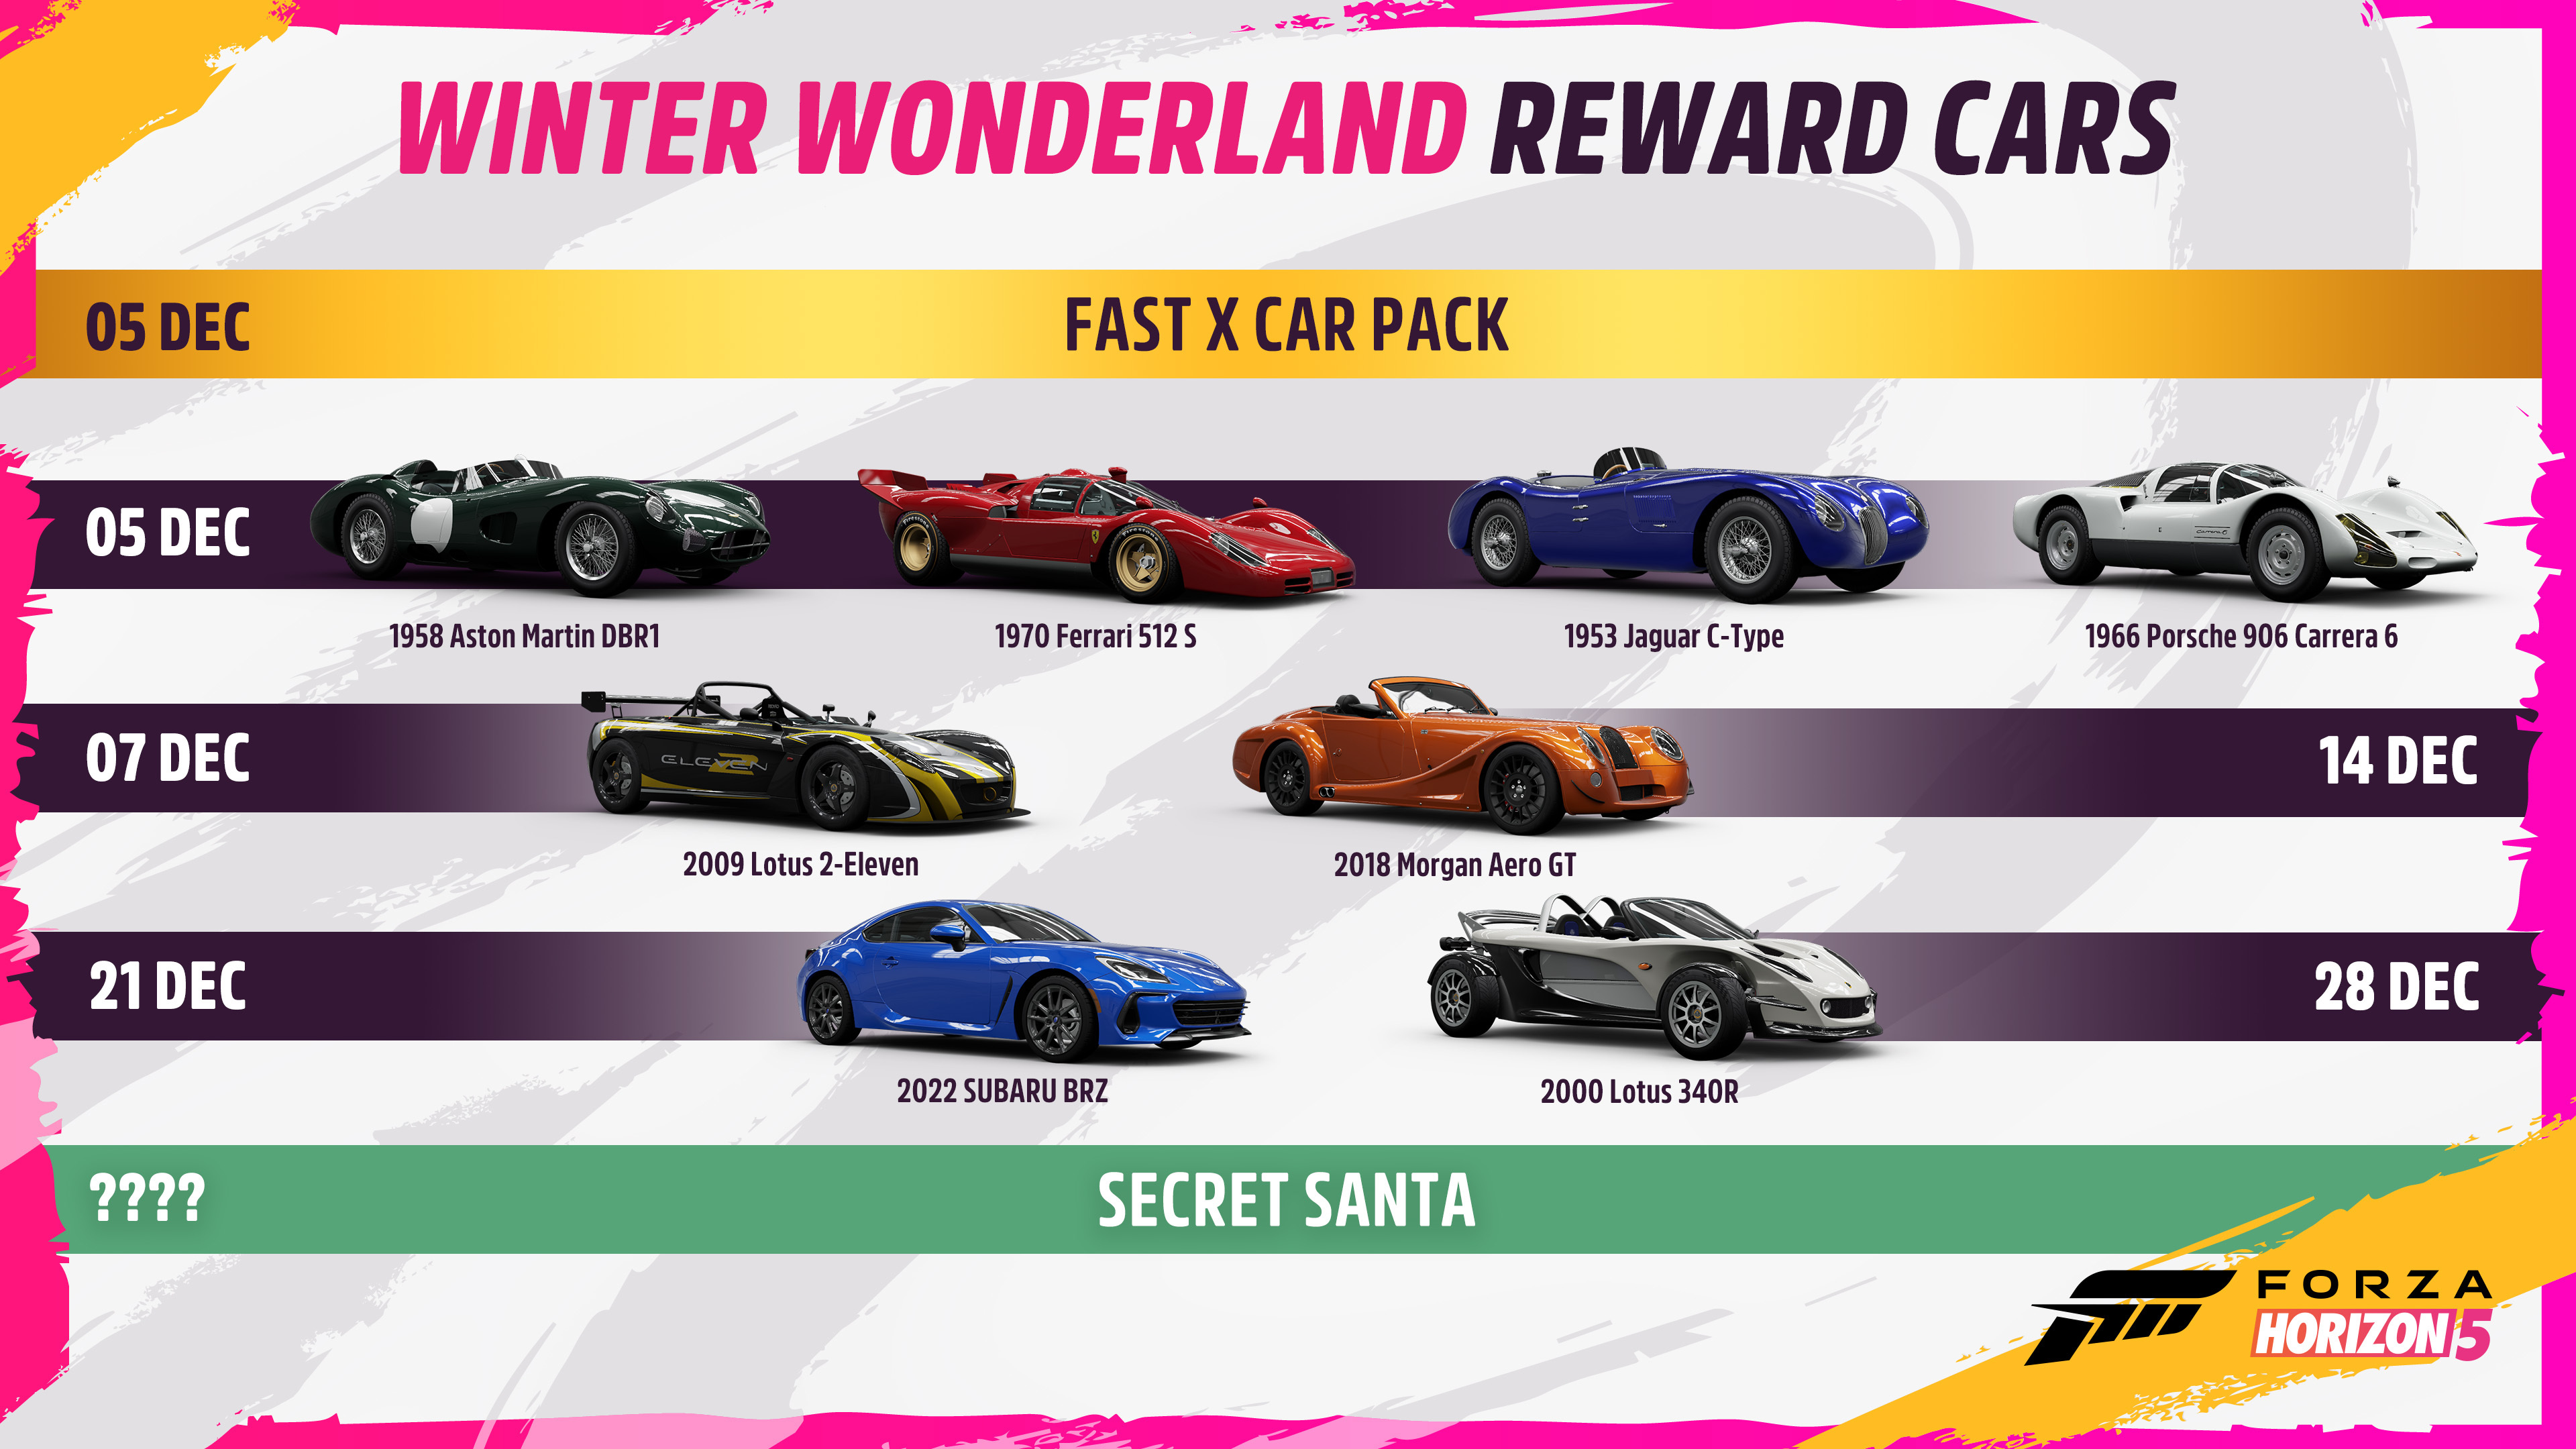 Forza Horizon on X: Donut Media is back in #ForzaHorizon5! Drive the  Hi-Low cars in an unmissable new story, tune up your next ride at the  Horizon Test Track, fit new car